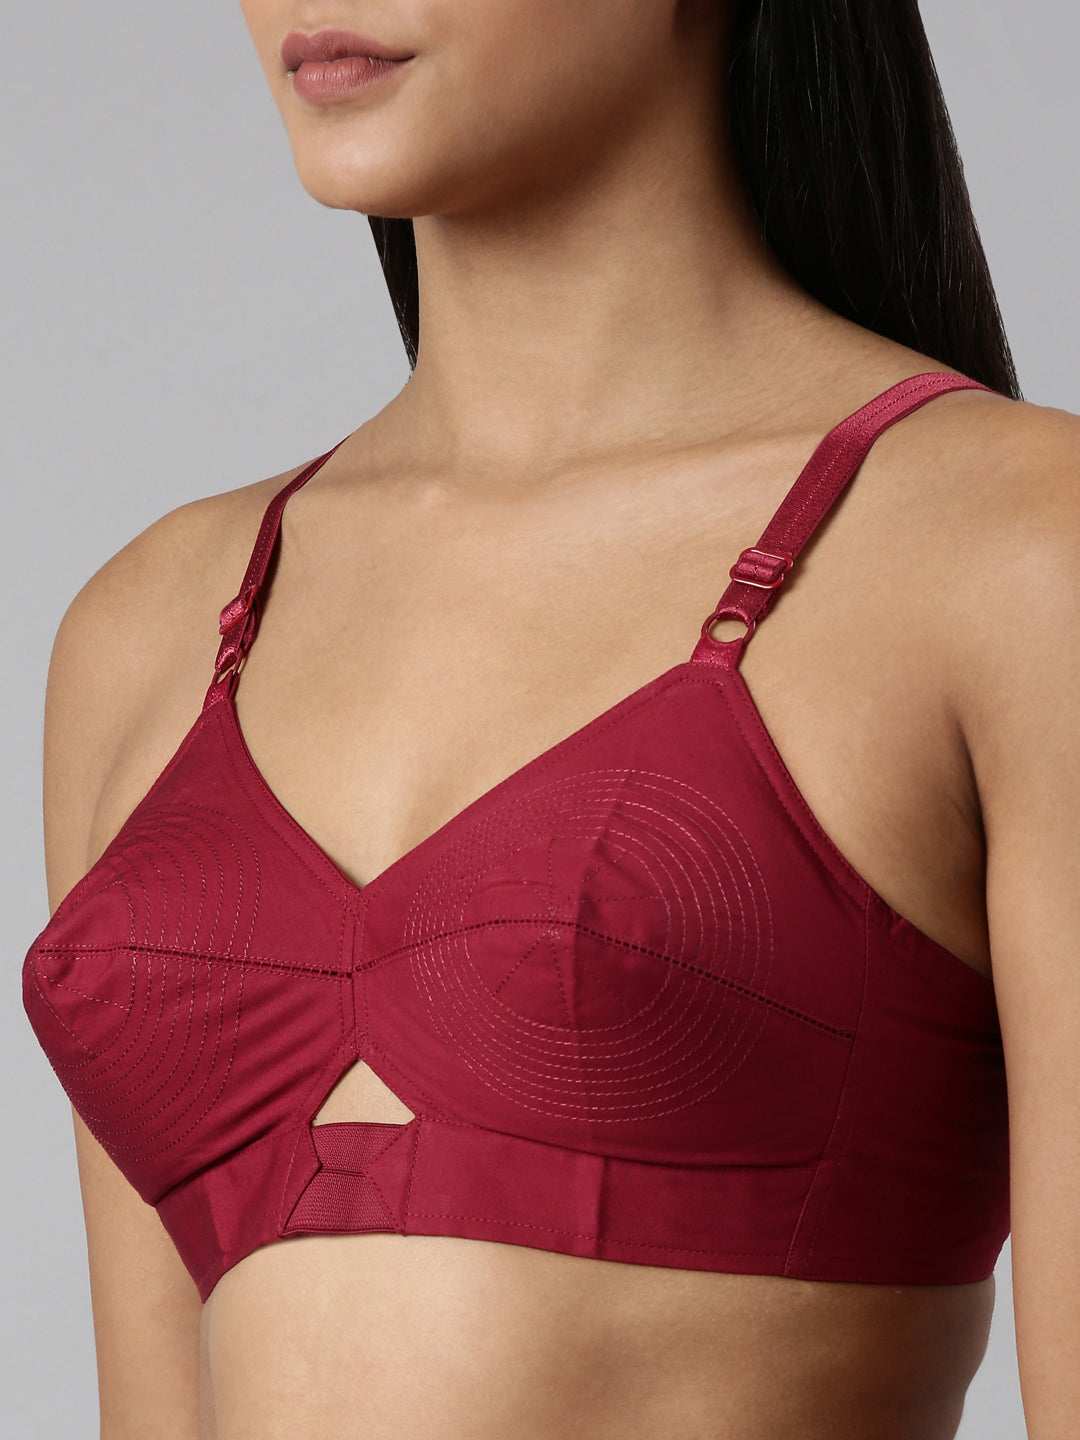 blossom-authentic bra-C & D Cups-maroon2-Woven cotton-everyday bra